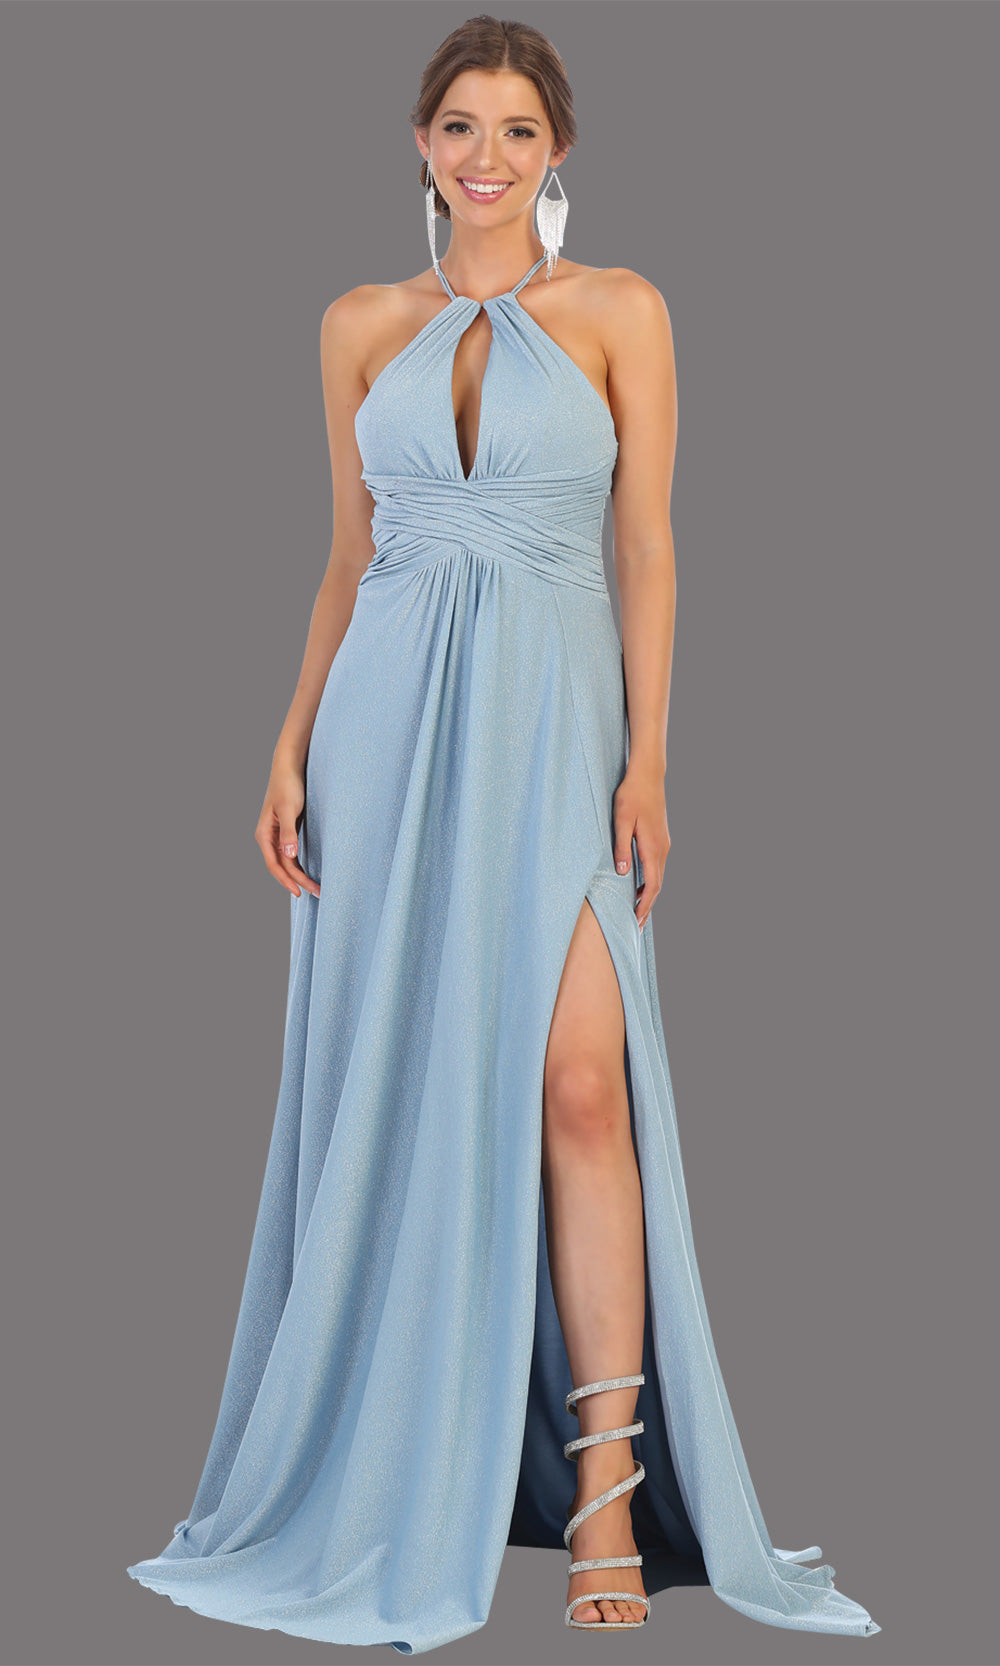 Mayqueen MQ1729 long dusty blue flowy dress w/ high neck & high slit. This light blue dress is perfect for bridesmaid dresses, simple wedding guest dress, prom dress, gala, black tie wedding. Plus sizes are available, evening party dress.jpg